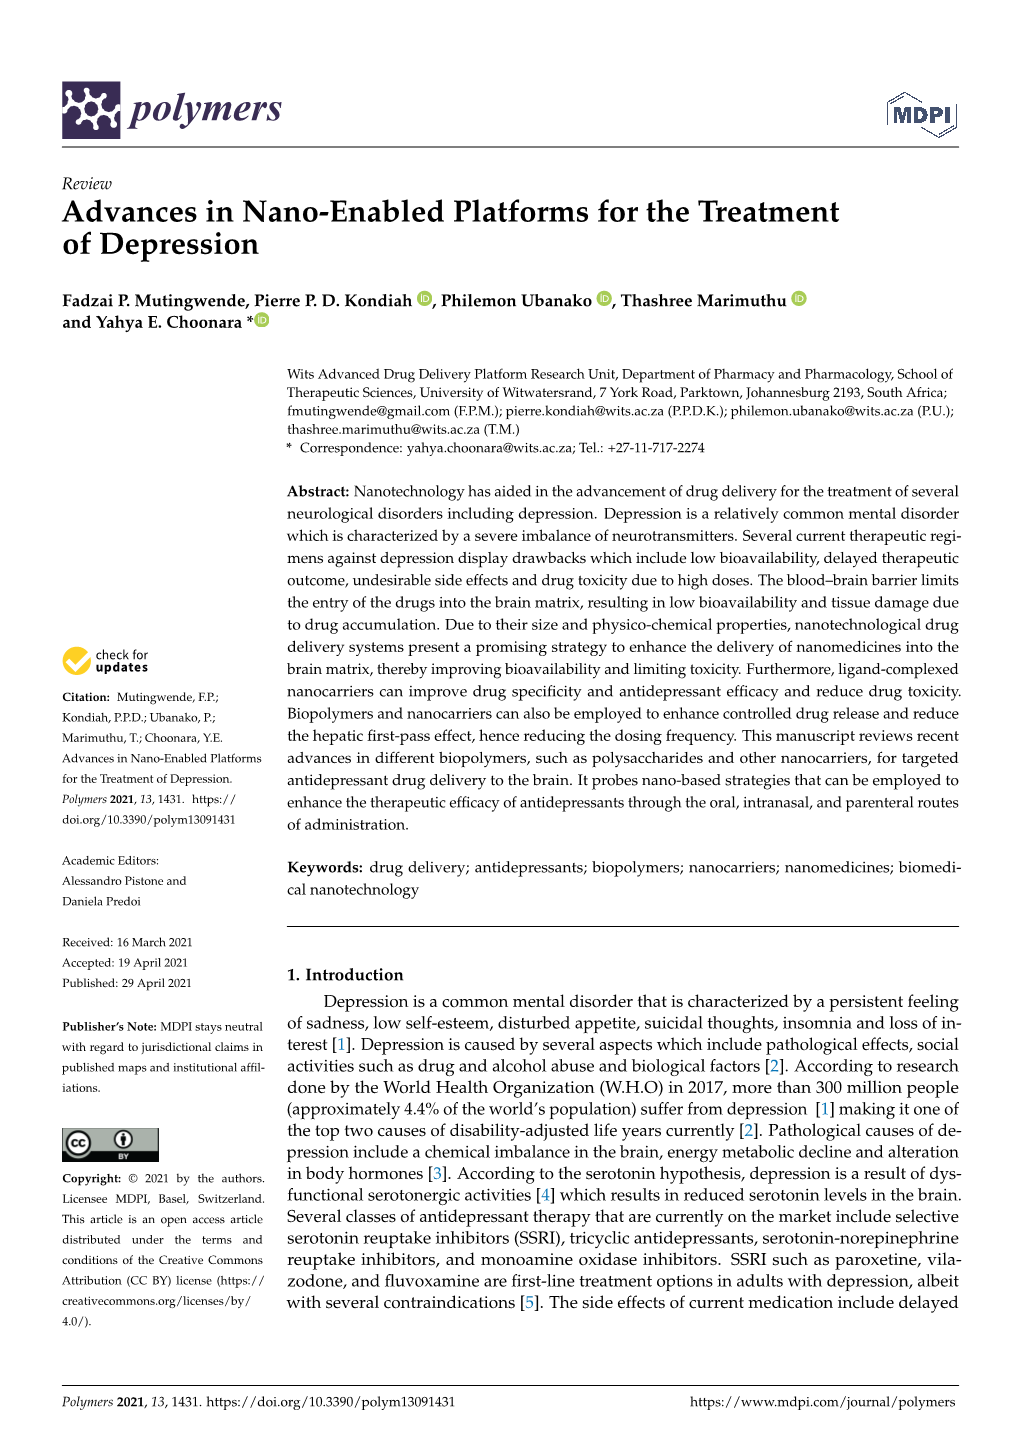 Advances in Nano-Enabled Platforms for the Treatment of Depression